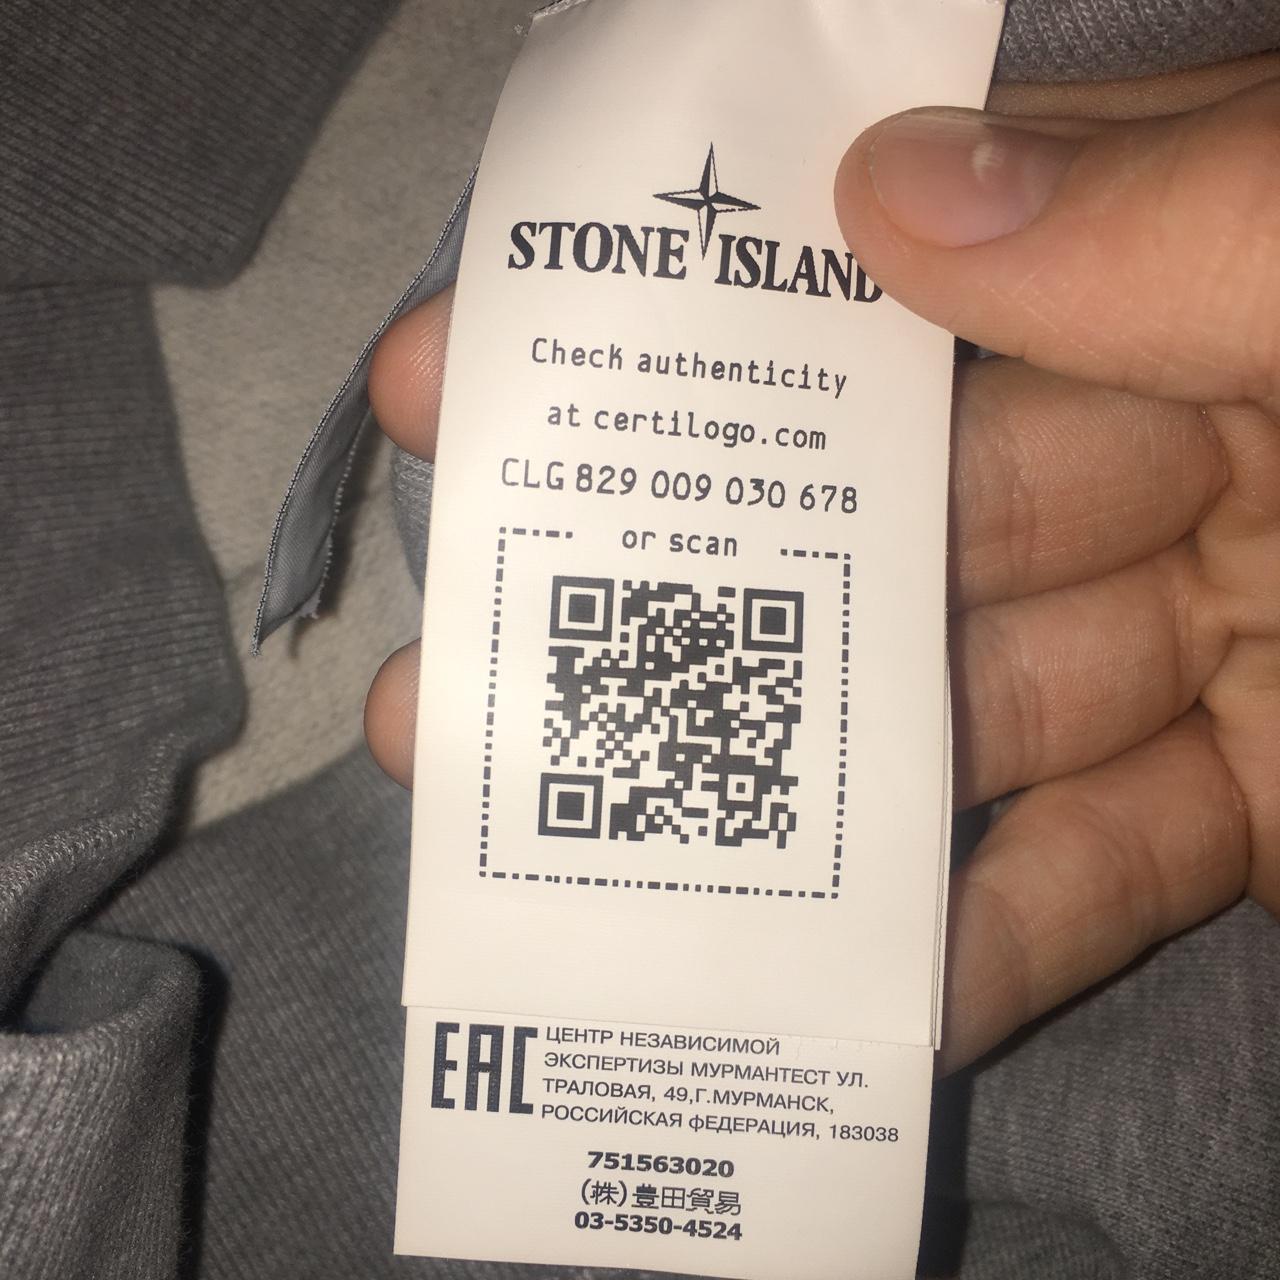 •STONE ISLAND JUMPER• •SOLD• •DO NOT BUY FOR £5 WILL... - Depop